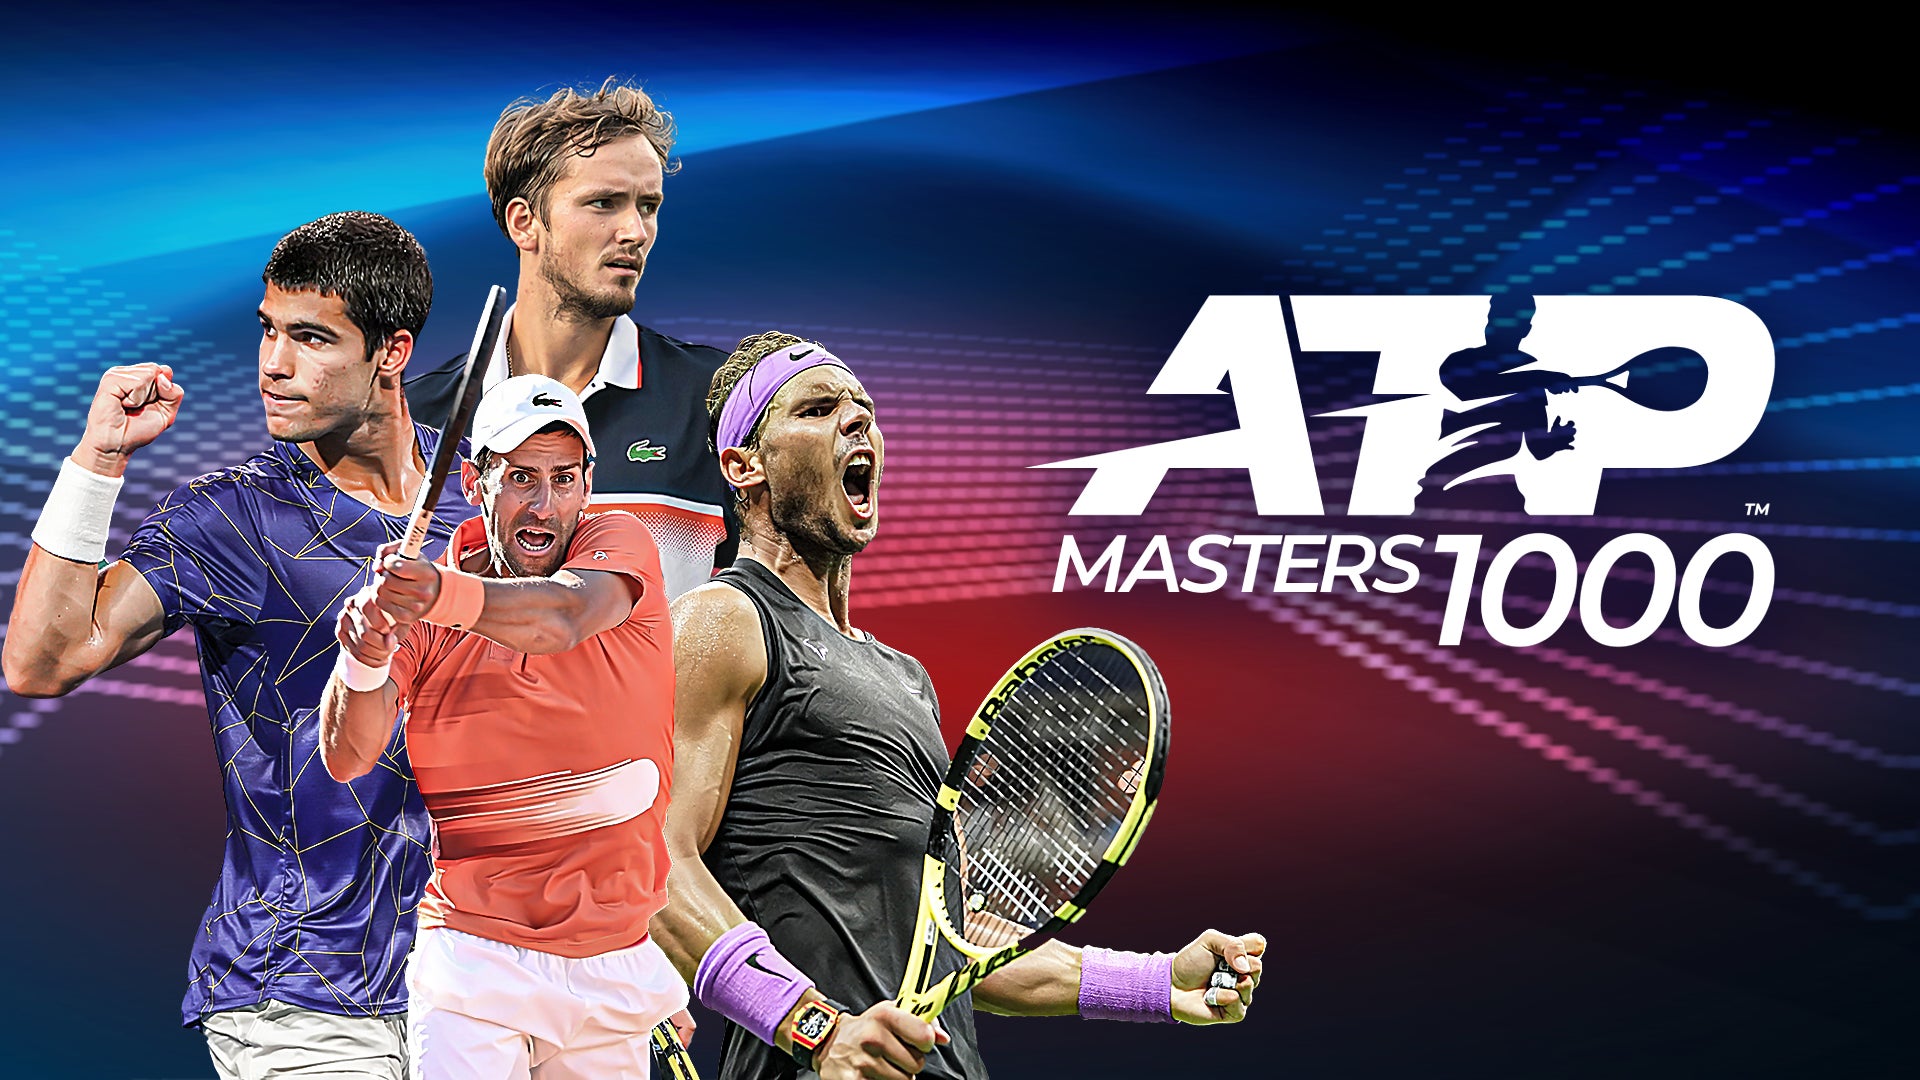 ATP Masters 1000 TV Show Watch All Seasons, Full Episodes and Videos Online In HD Quality On JioCinema